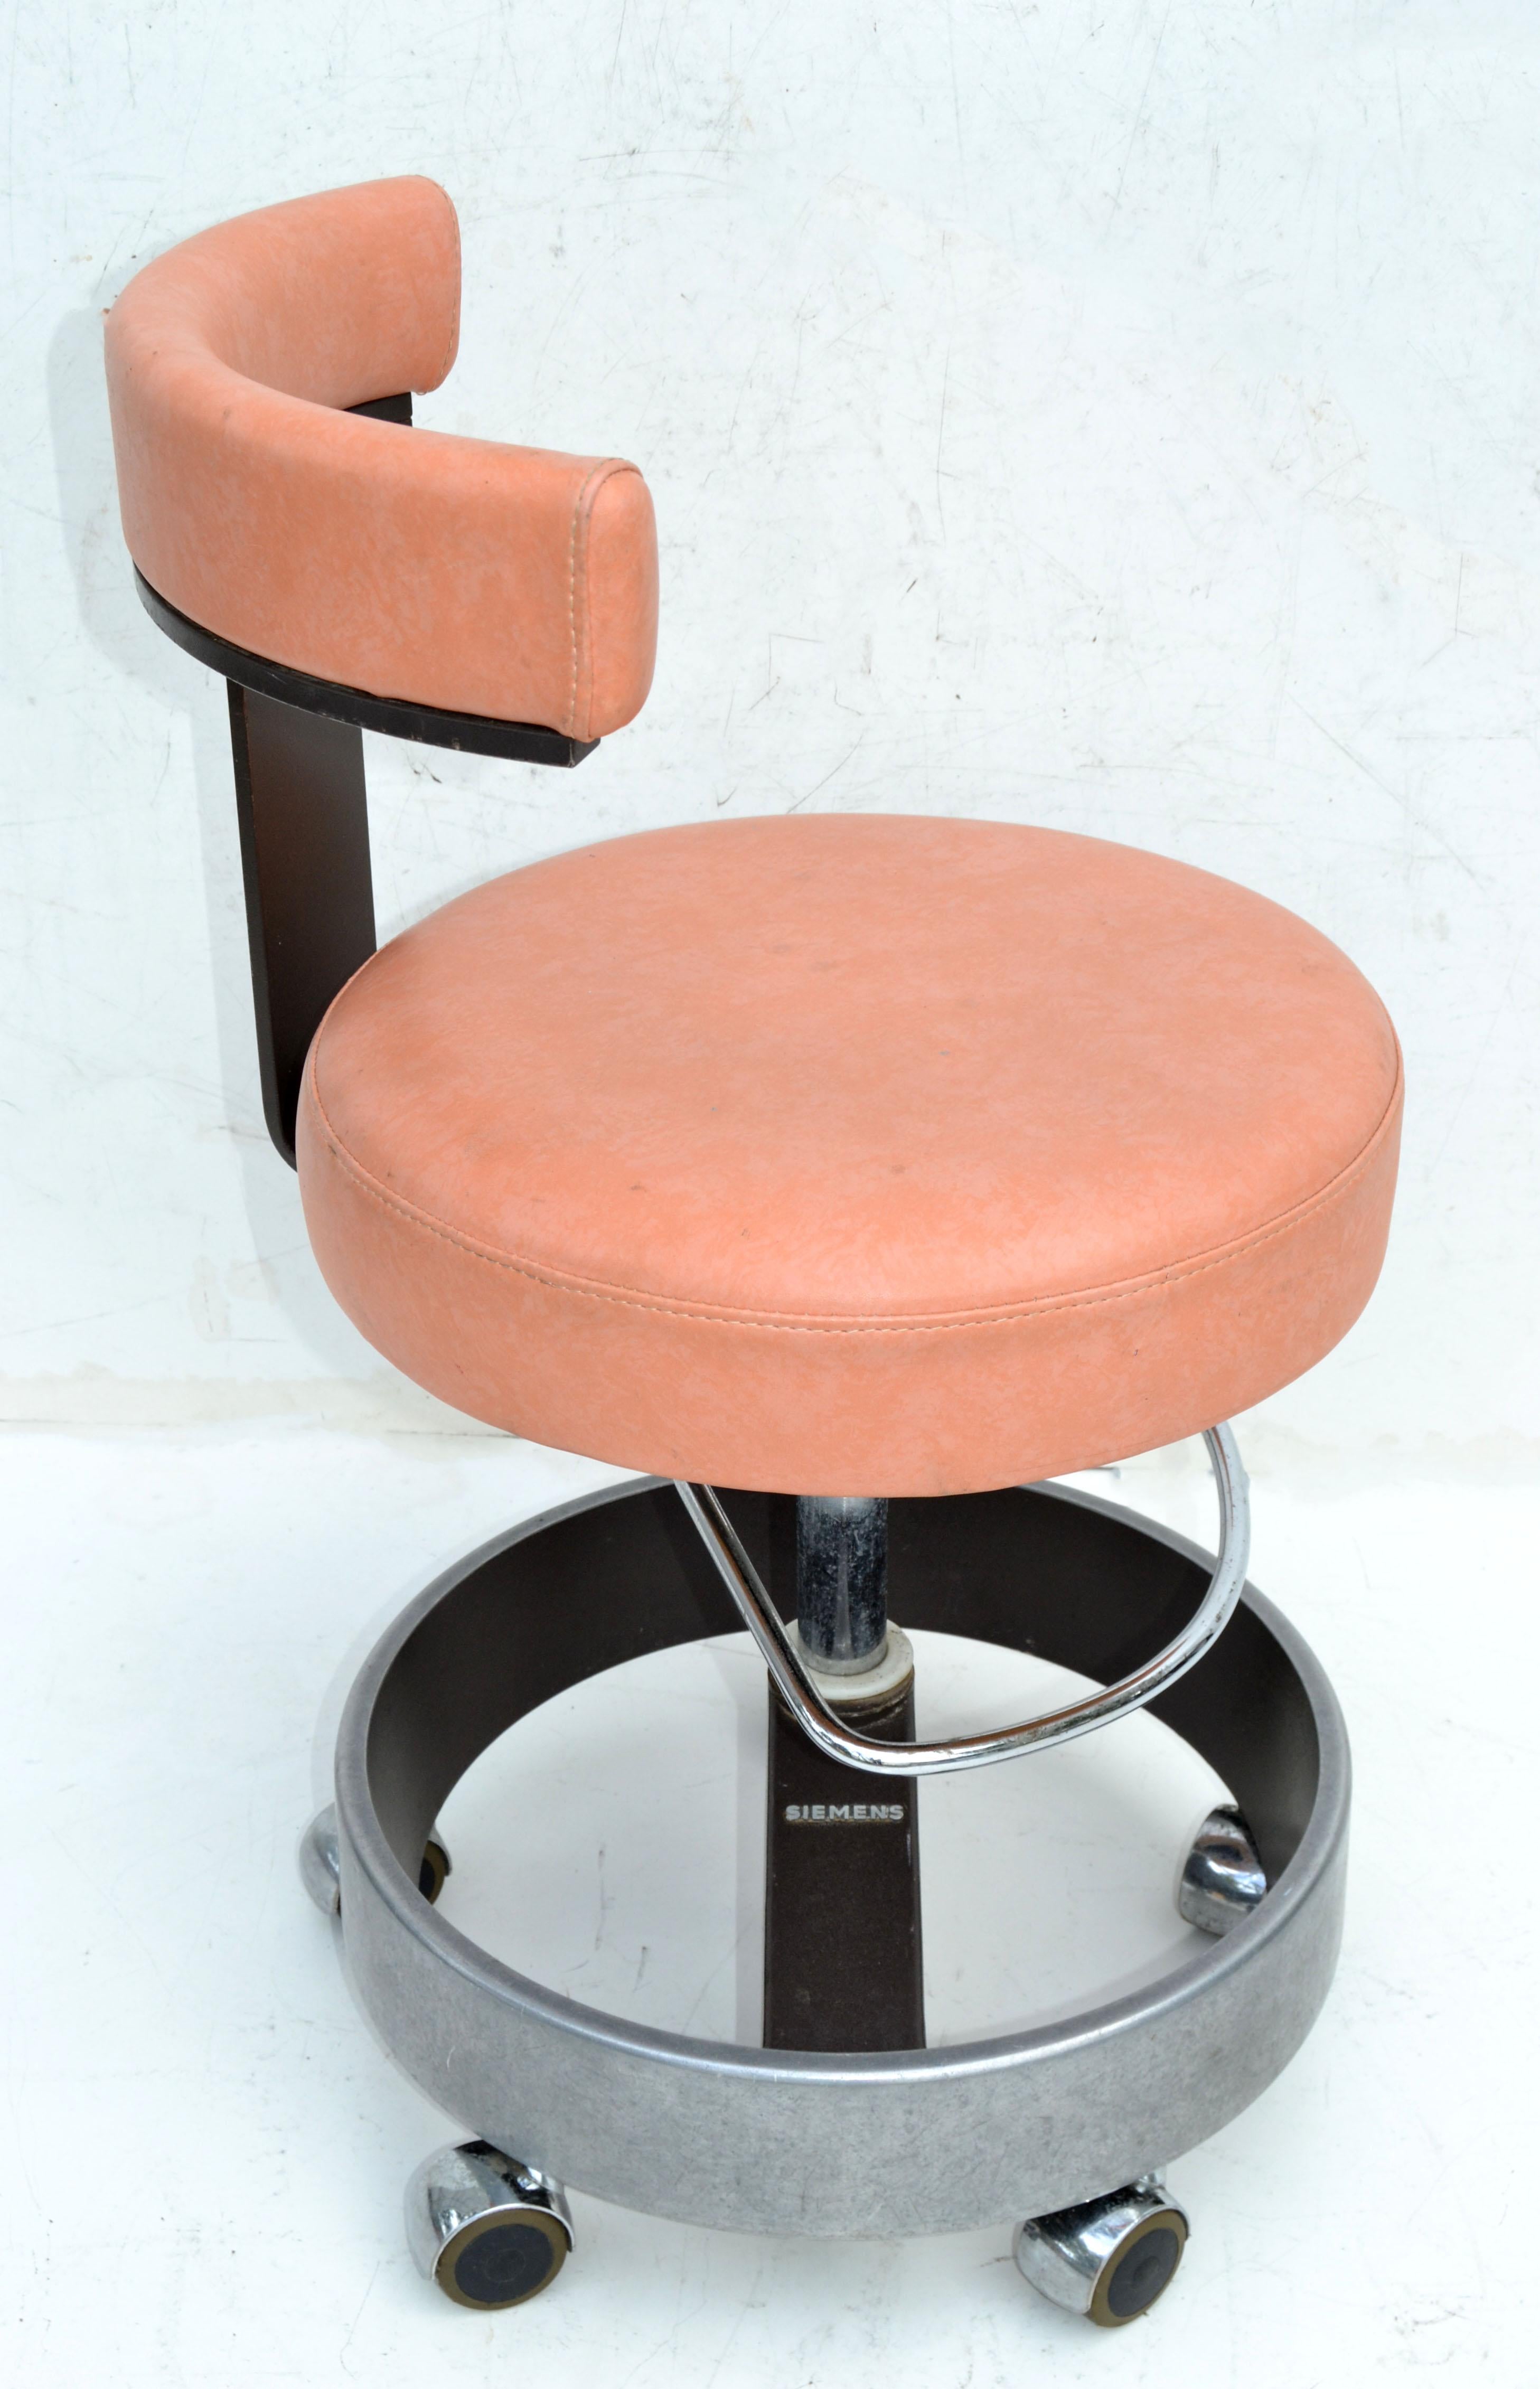 Early Industrial Bauhaus Style West German Office, Dental, or Medical Stool from Siemens
This office or medical stool was manufactured by Siemens in West-Germany in the late 1960s. 
It is made from steel, aluminum and upholstered in light peach